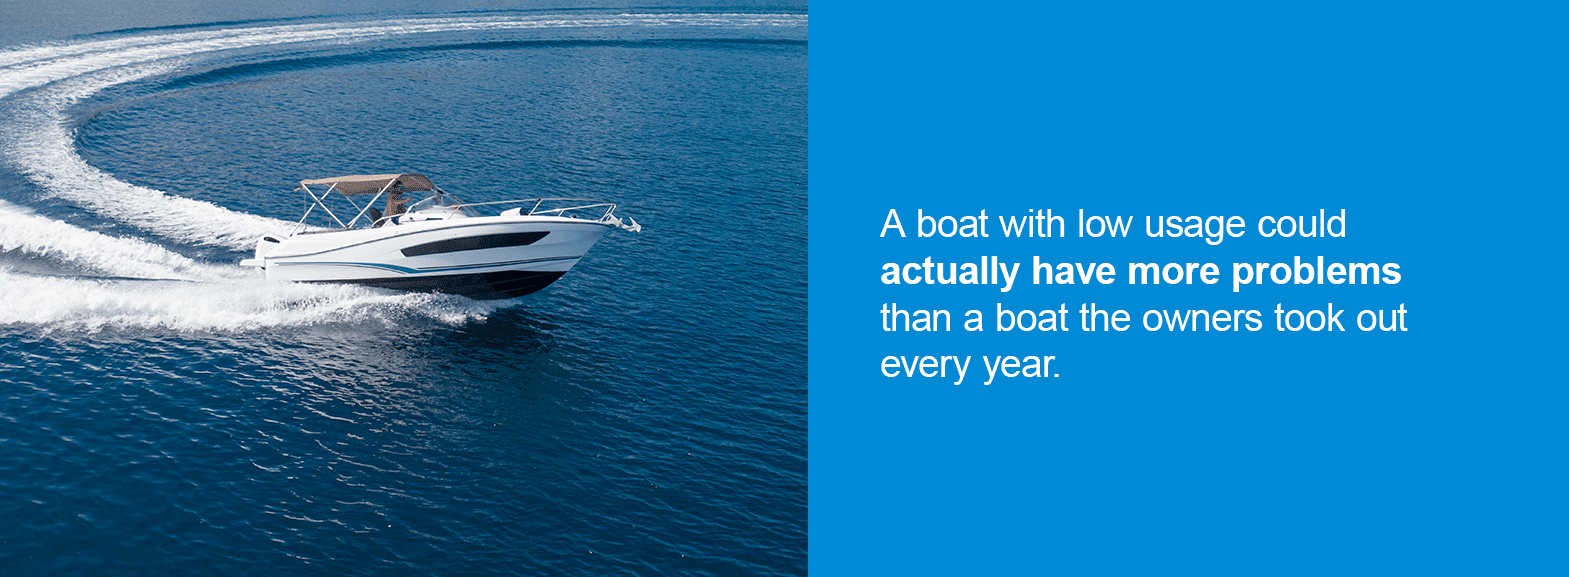 A boat with low usage could actually have more problems than a boat the owners took out every year. 